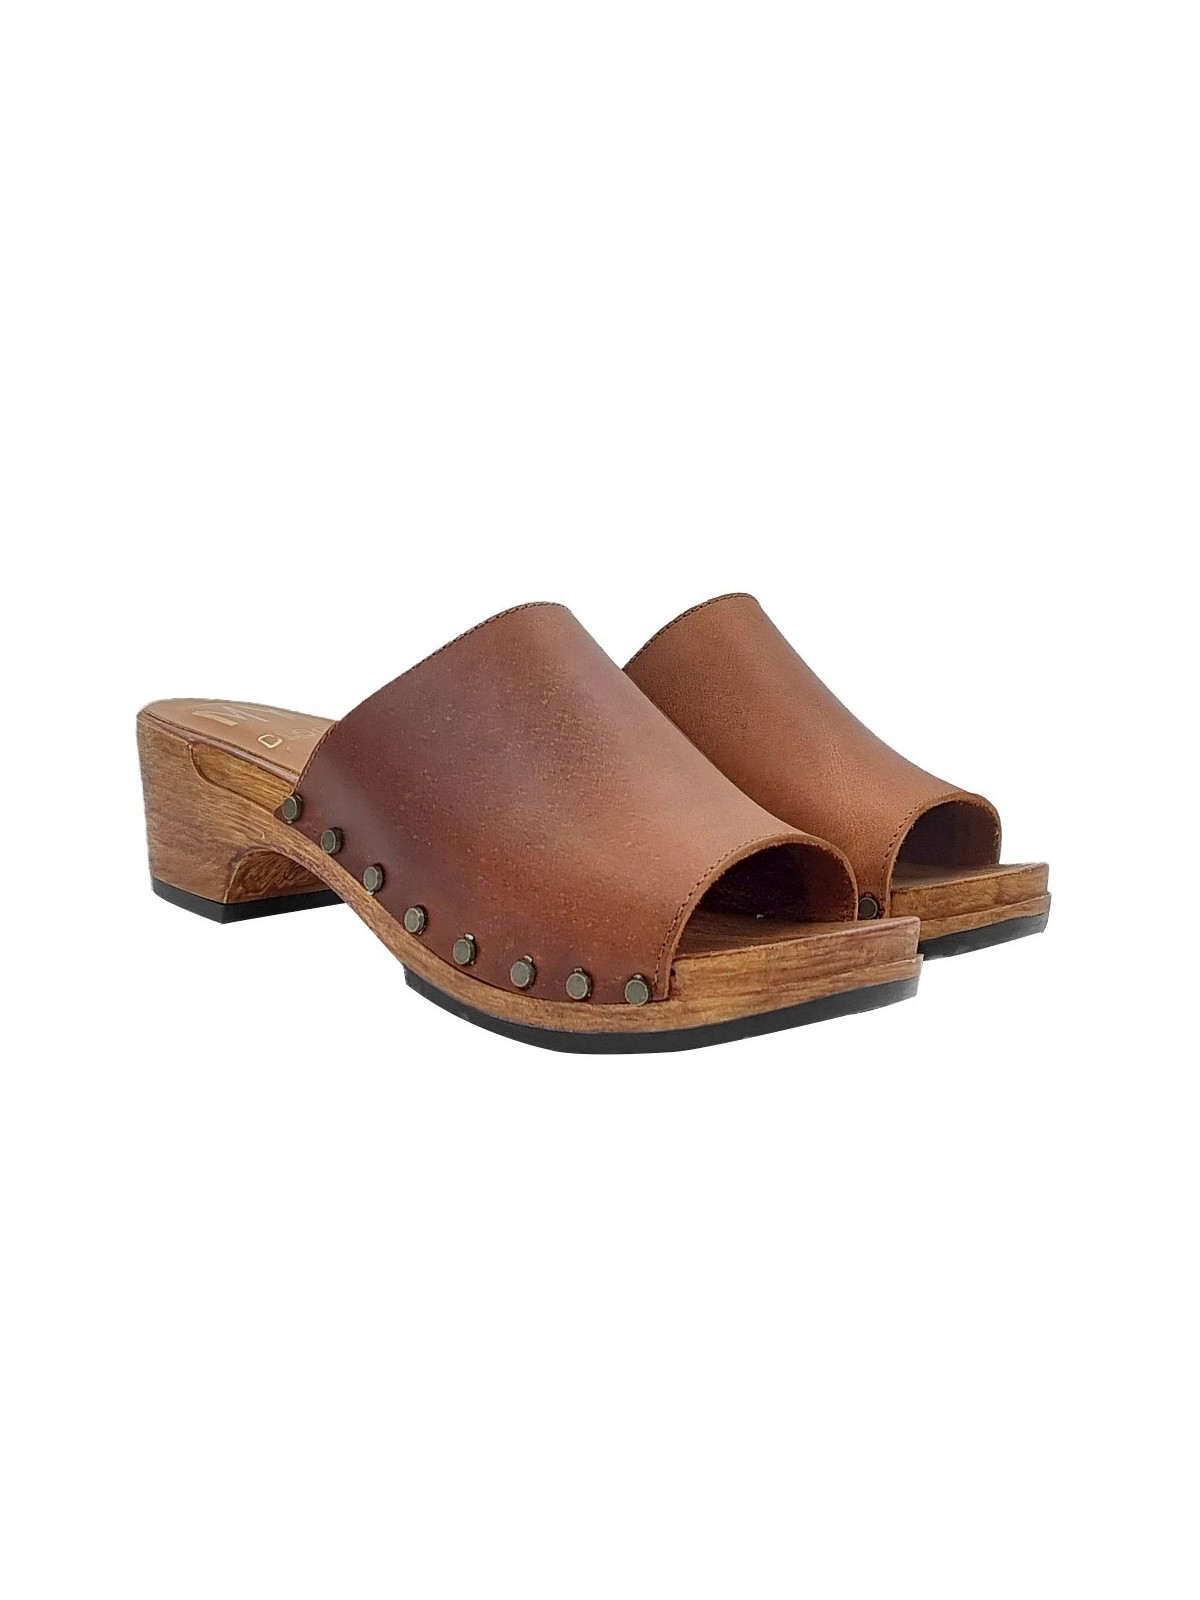 LOW BROWN CLOGS WITH WIDE LEATHER BAND